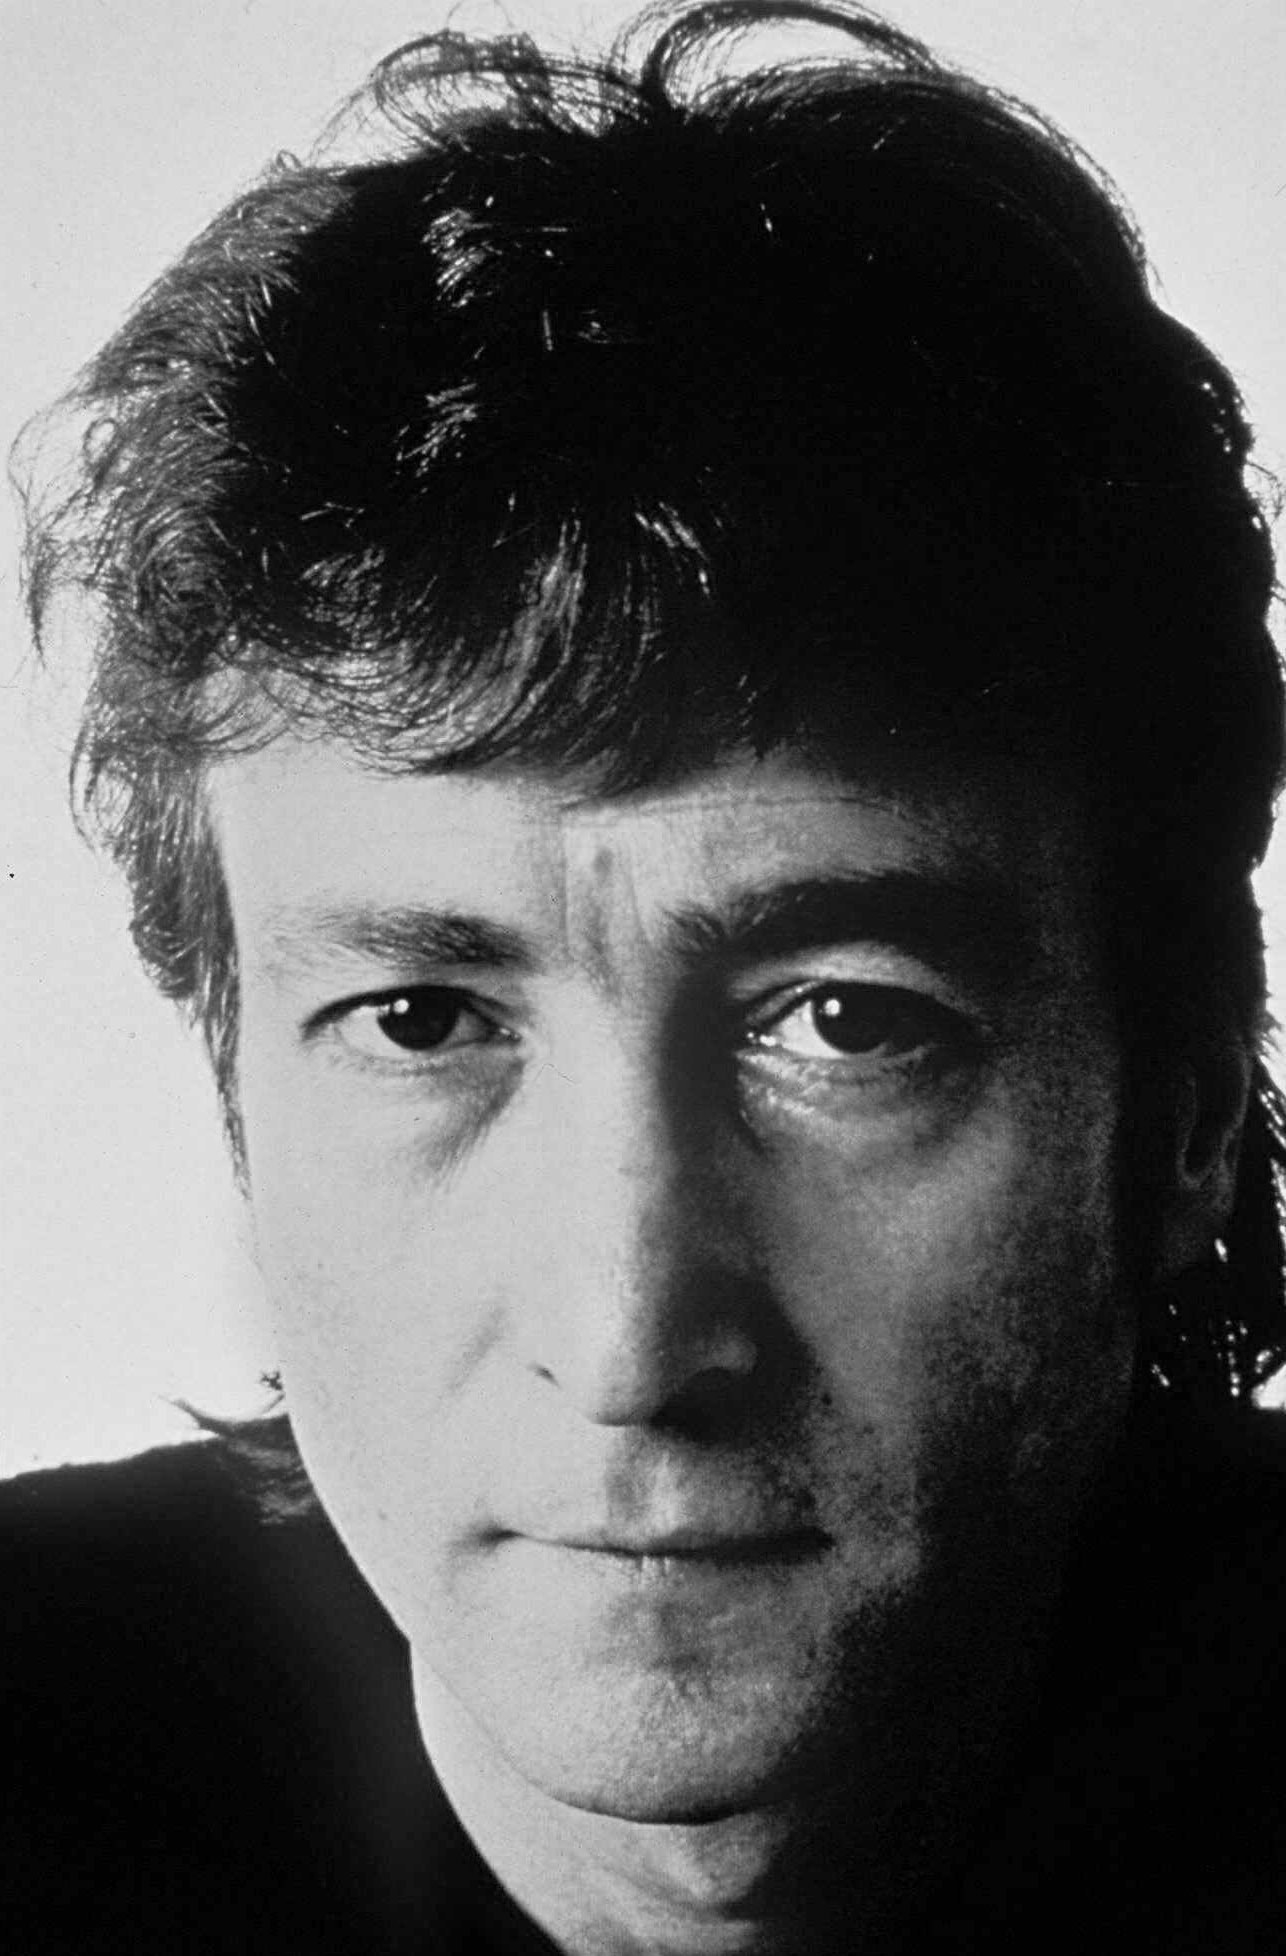 John Lennon in a tight close up photographed days before his death